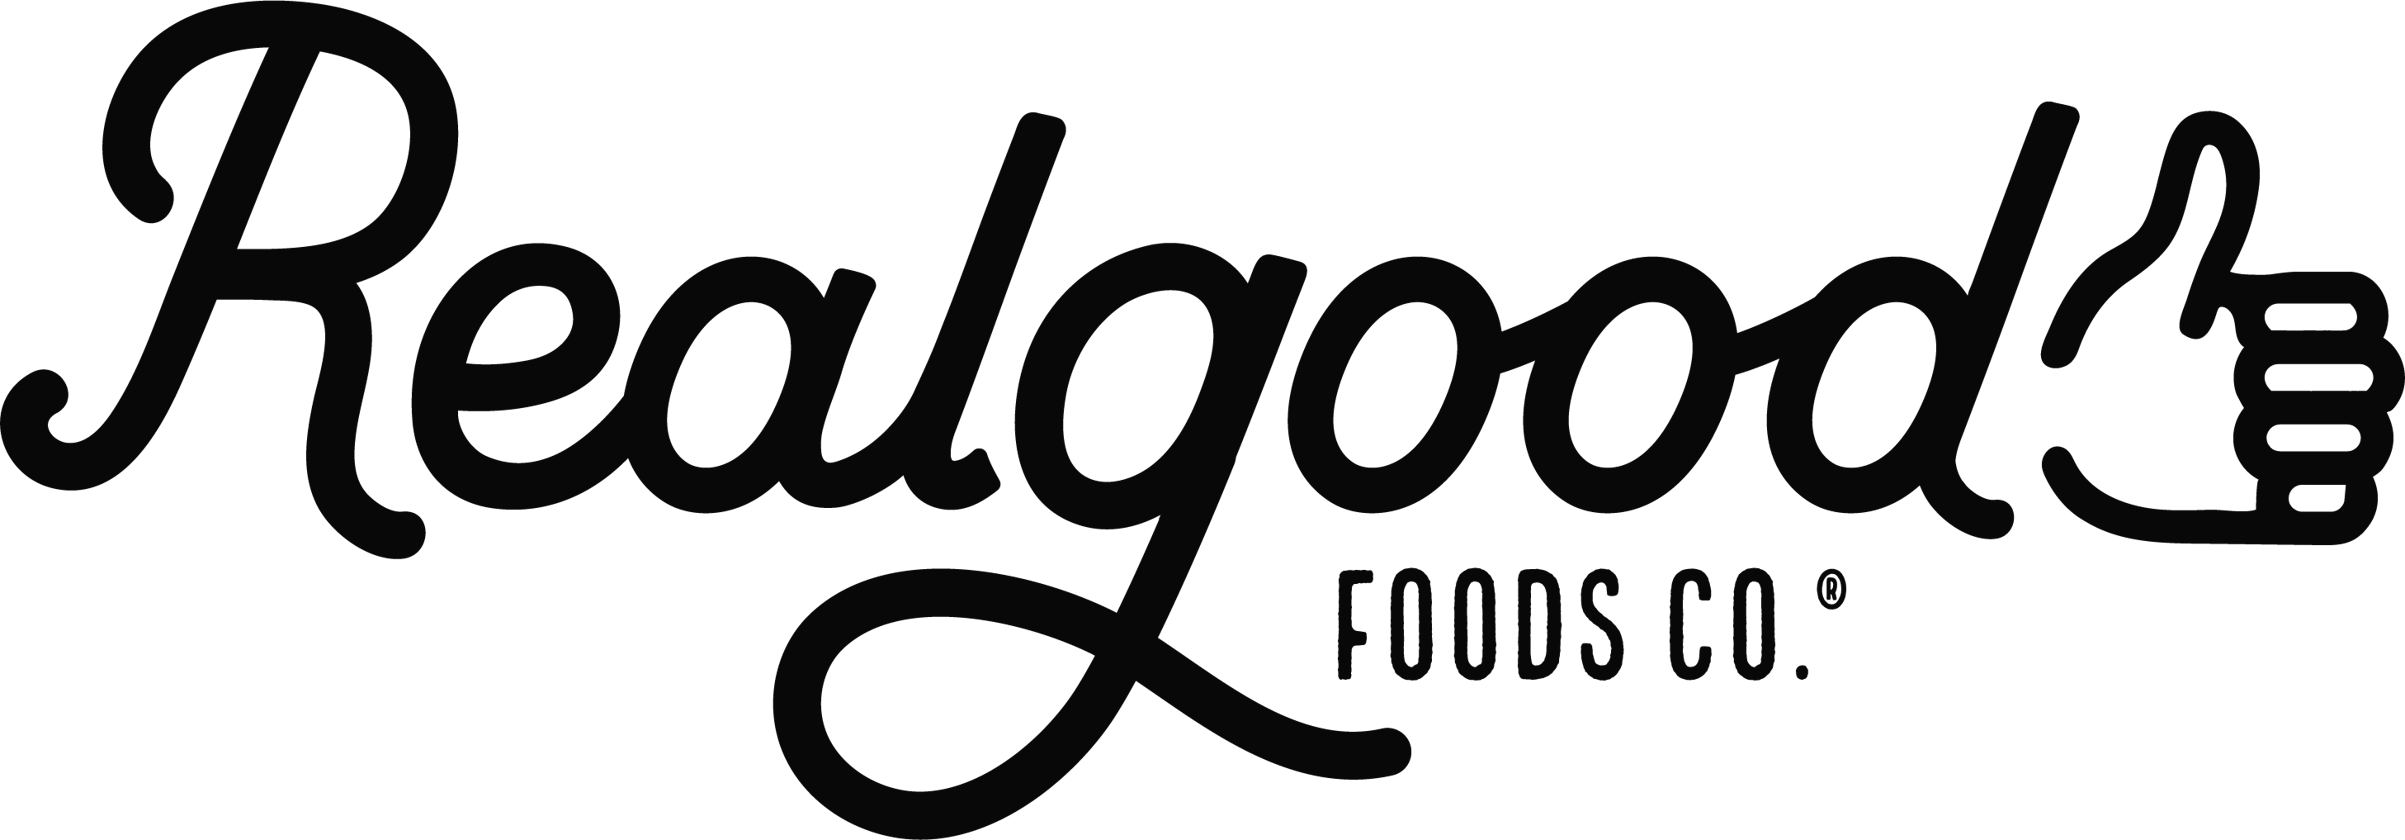 Real Good Foods Announces Launch of NEW Low Carbohydrate, High Protein Burrito Platform into the Refrigerated Entrée Category